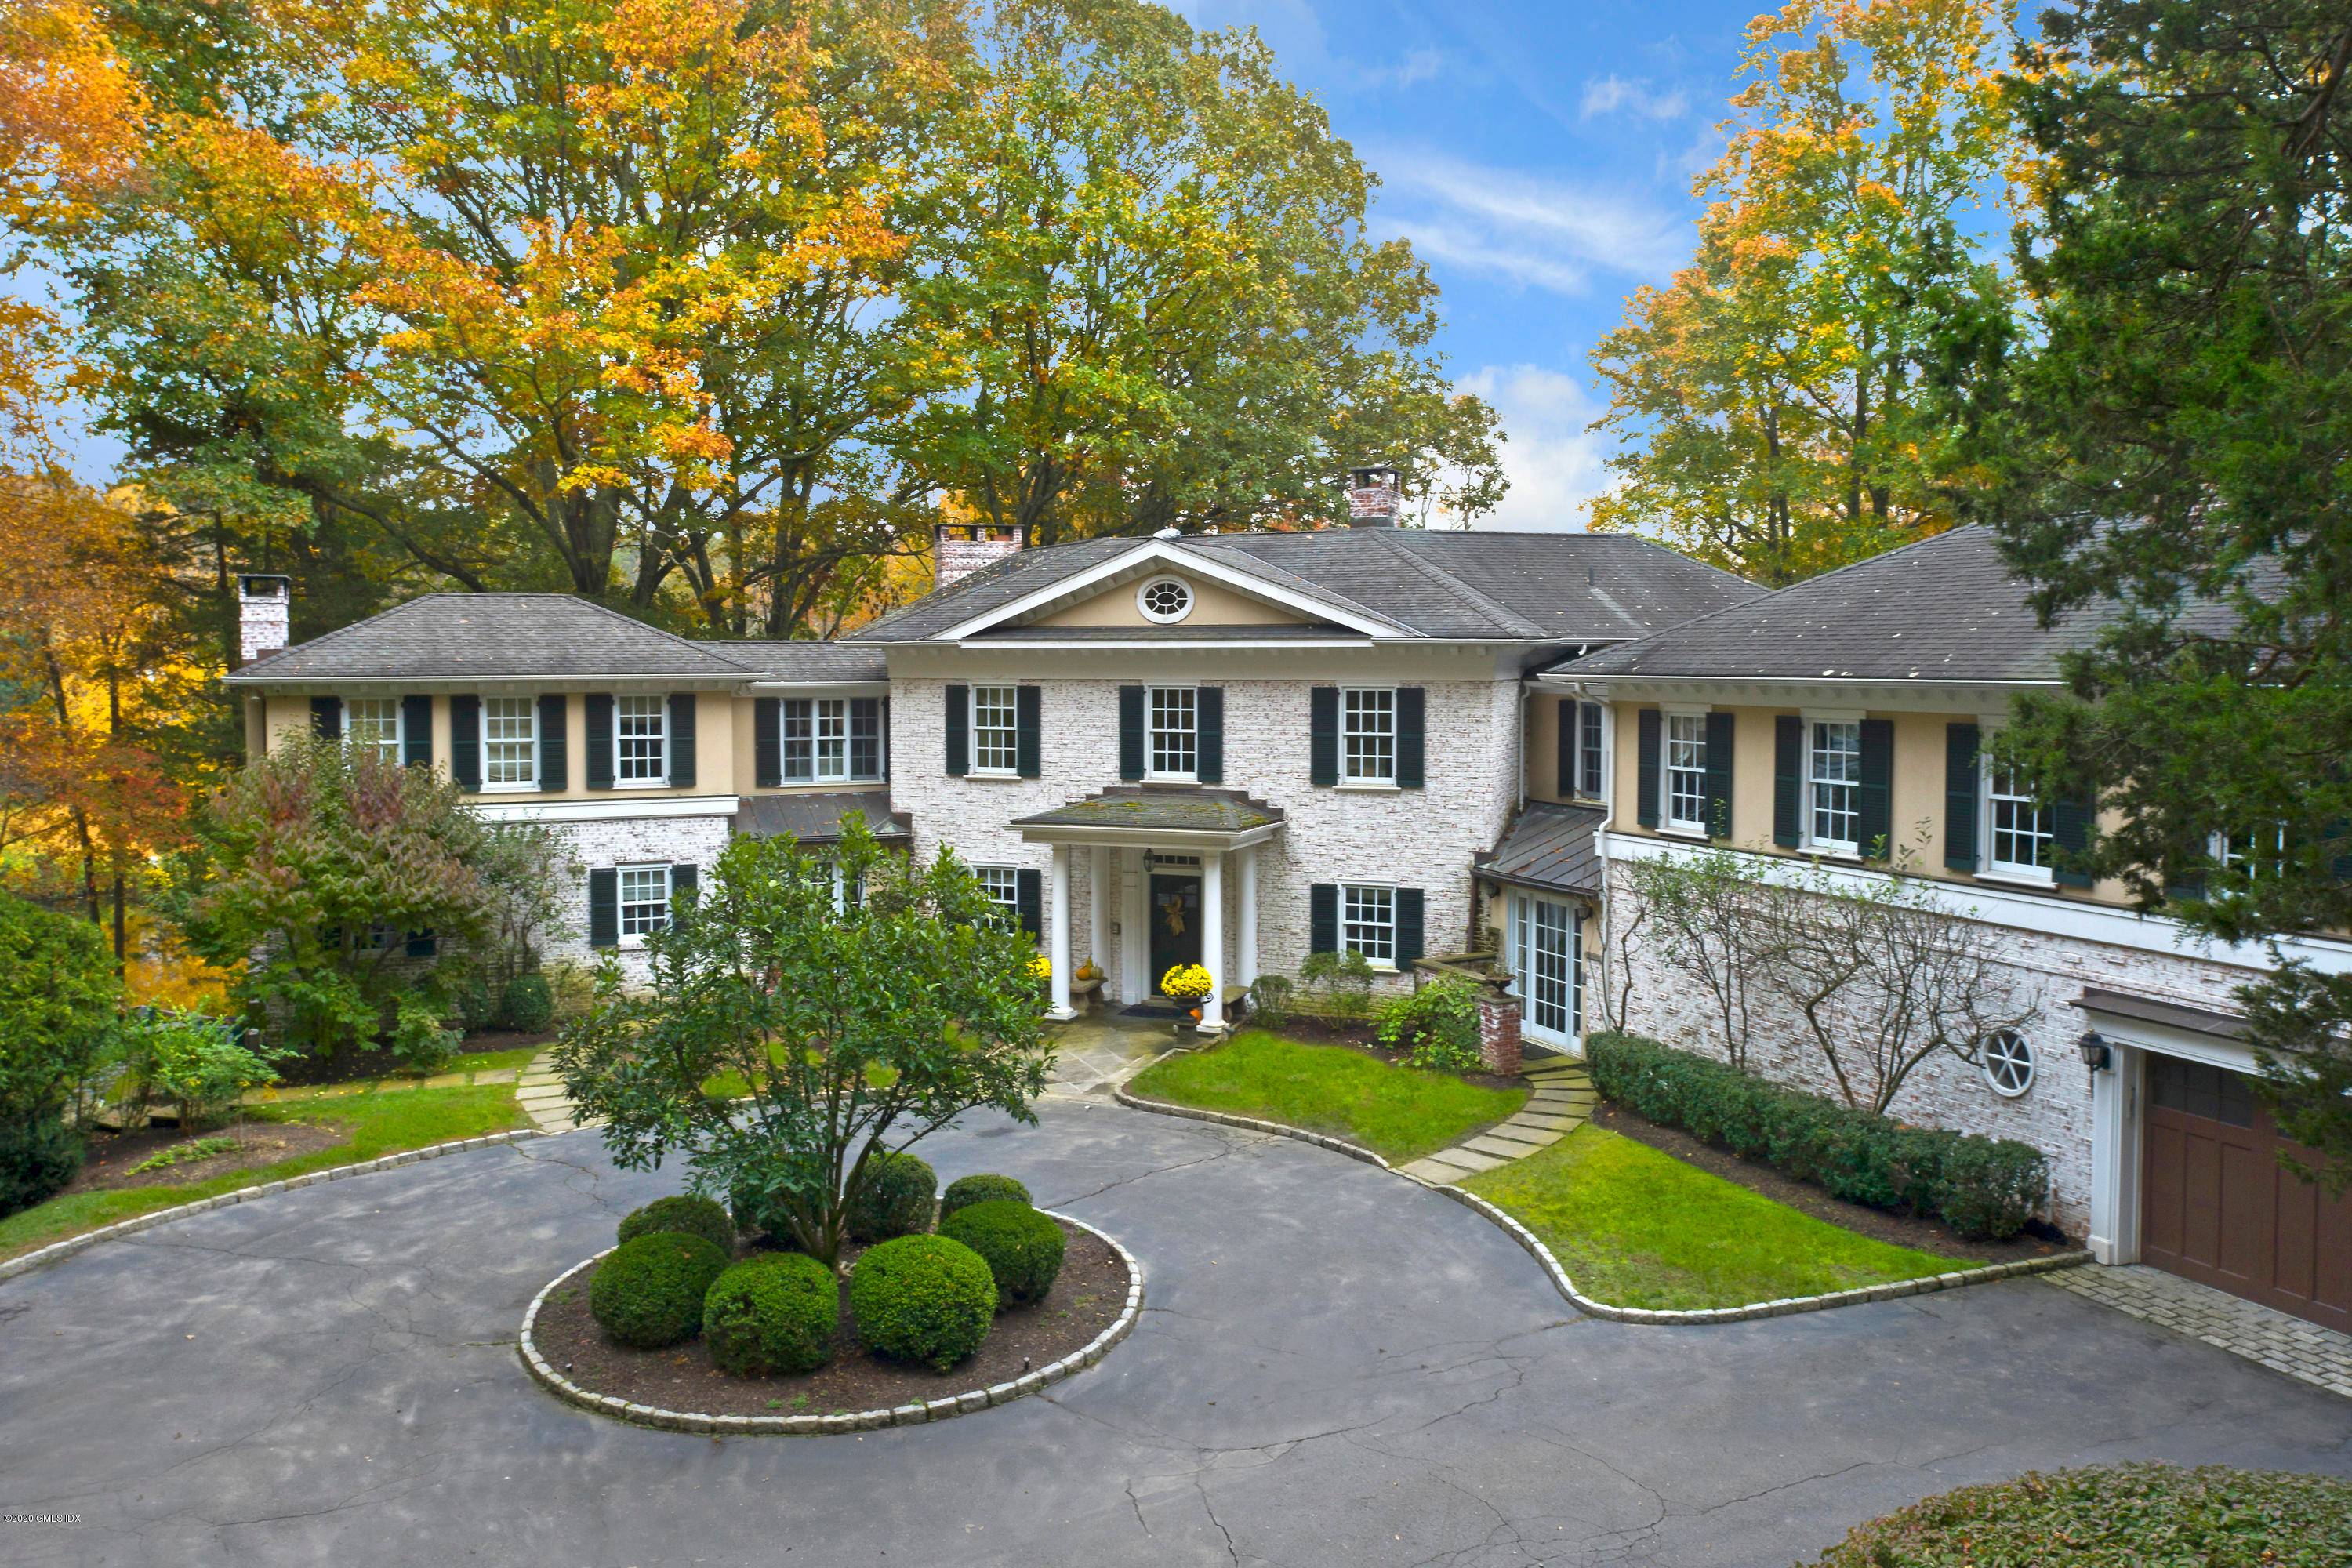 Elegant country estate in a truly magical setting on Collins Pond and the Rippowam River in bucolic New Canaan.